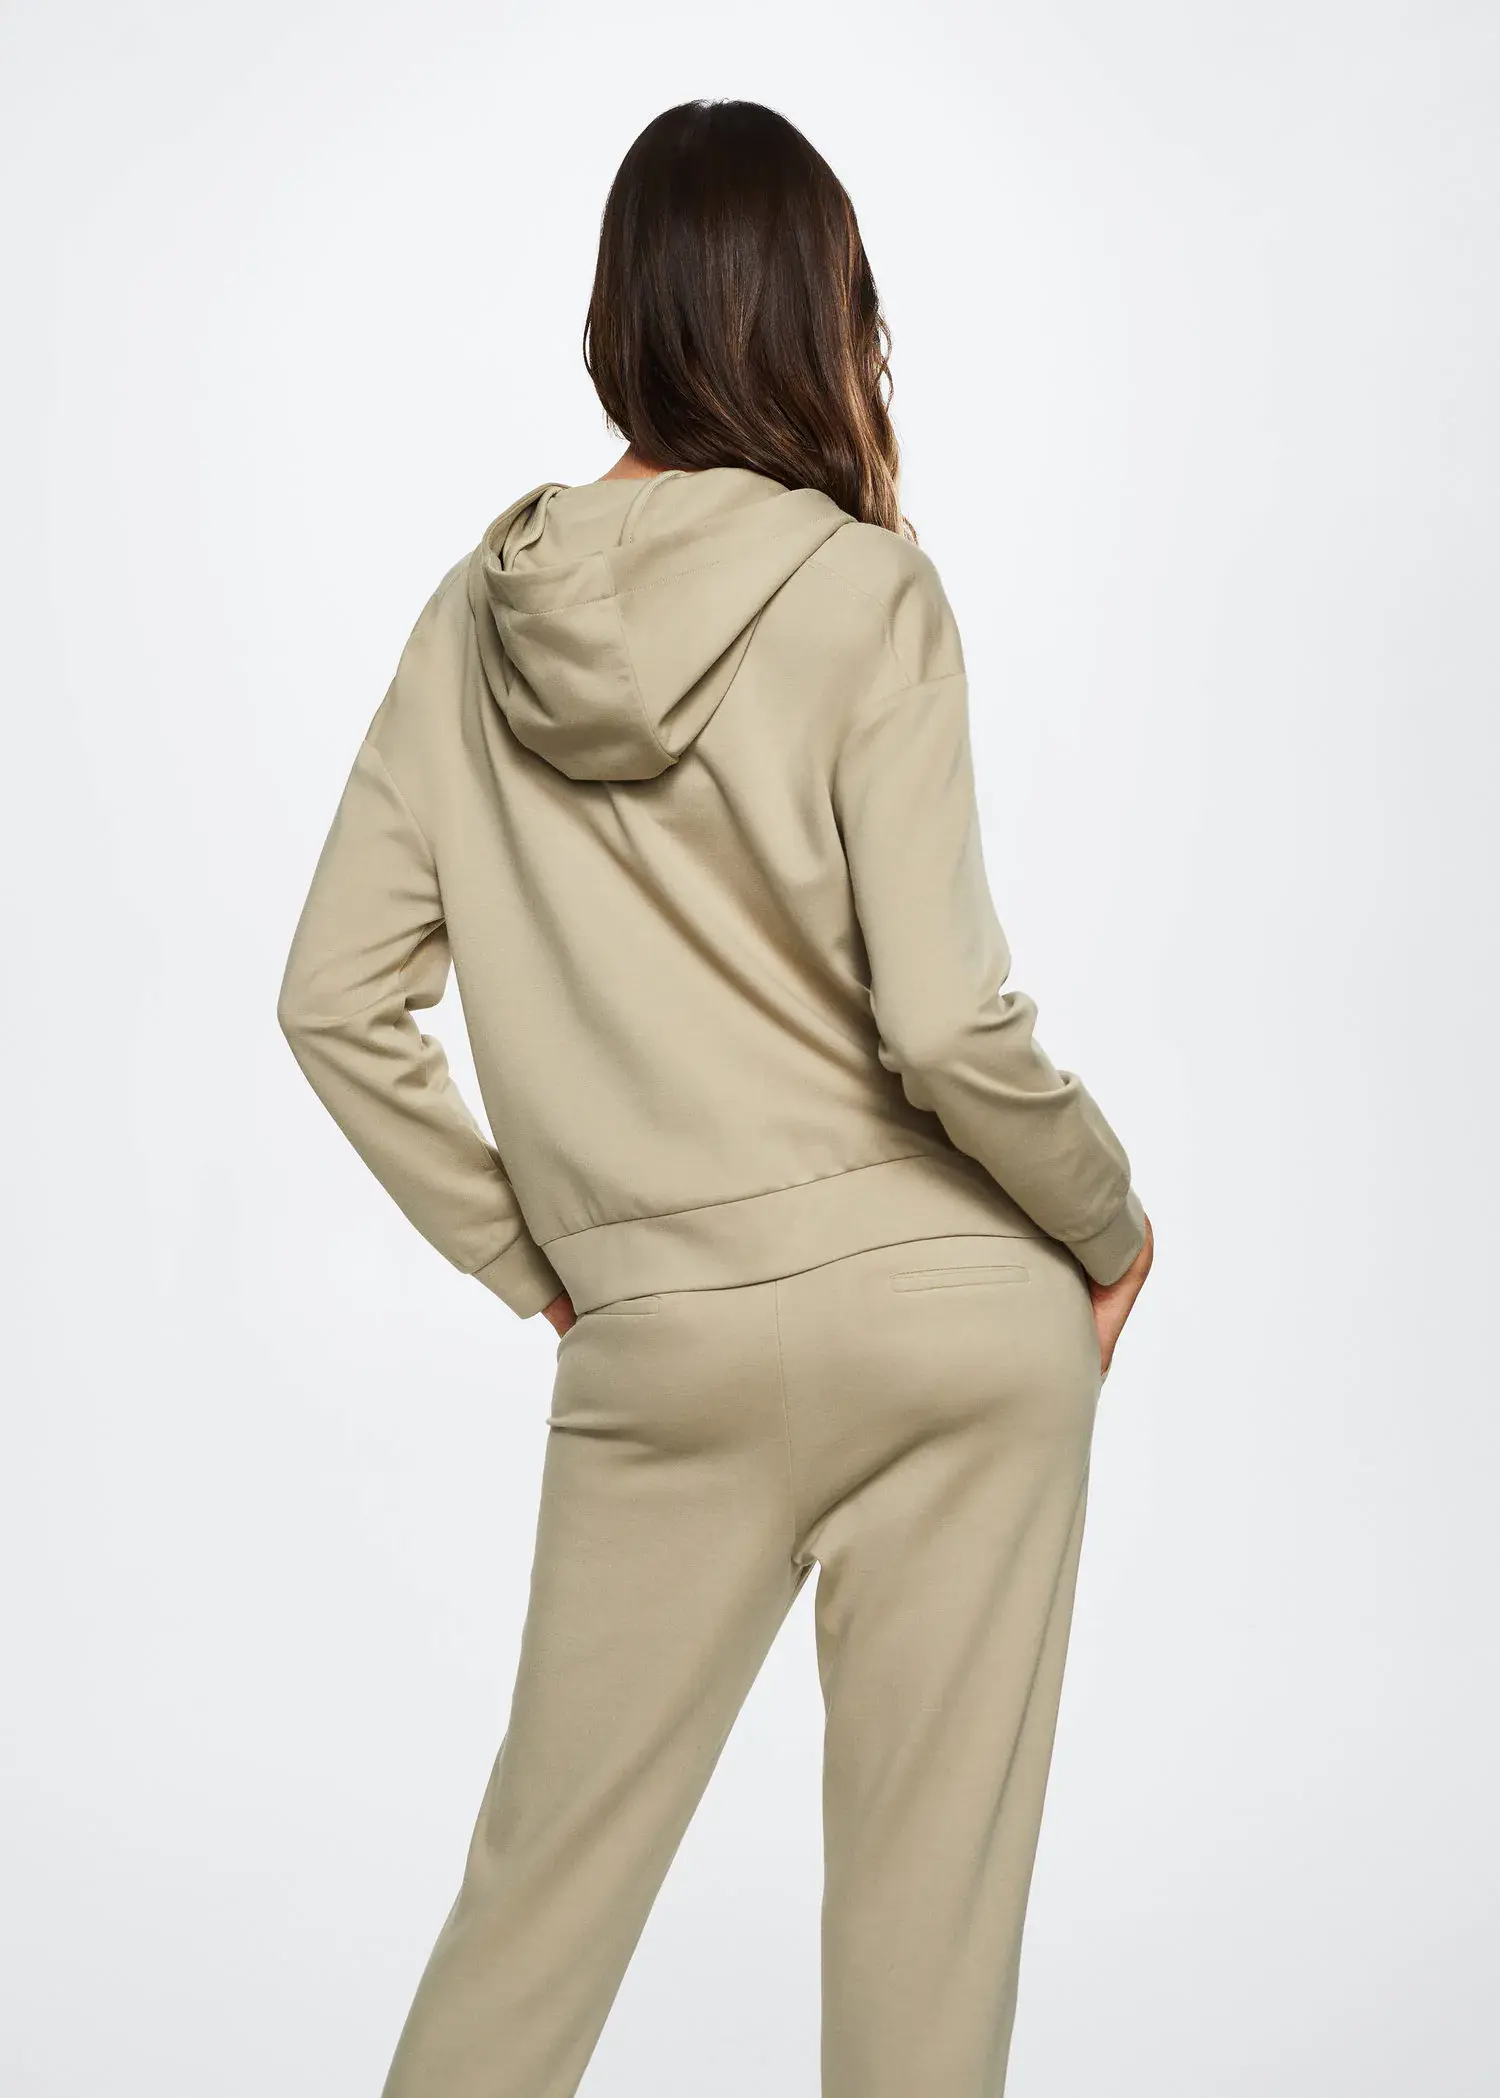 Mango Zipper high collar sweater. a woman in a tan outfit is standing with her hands in her pockets. 